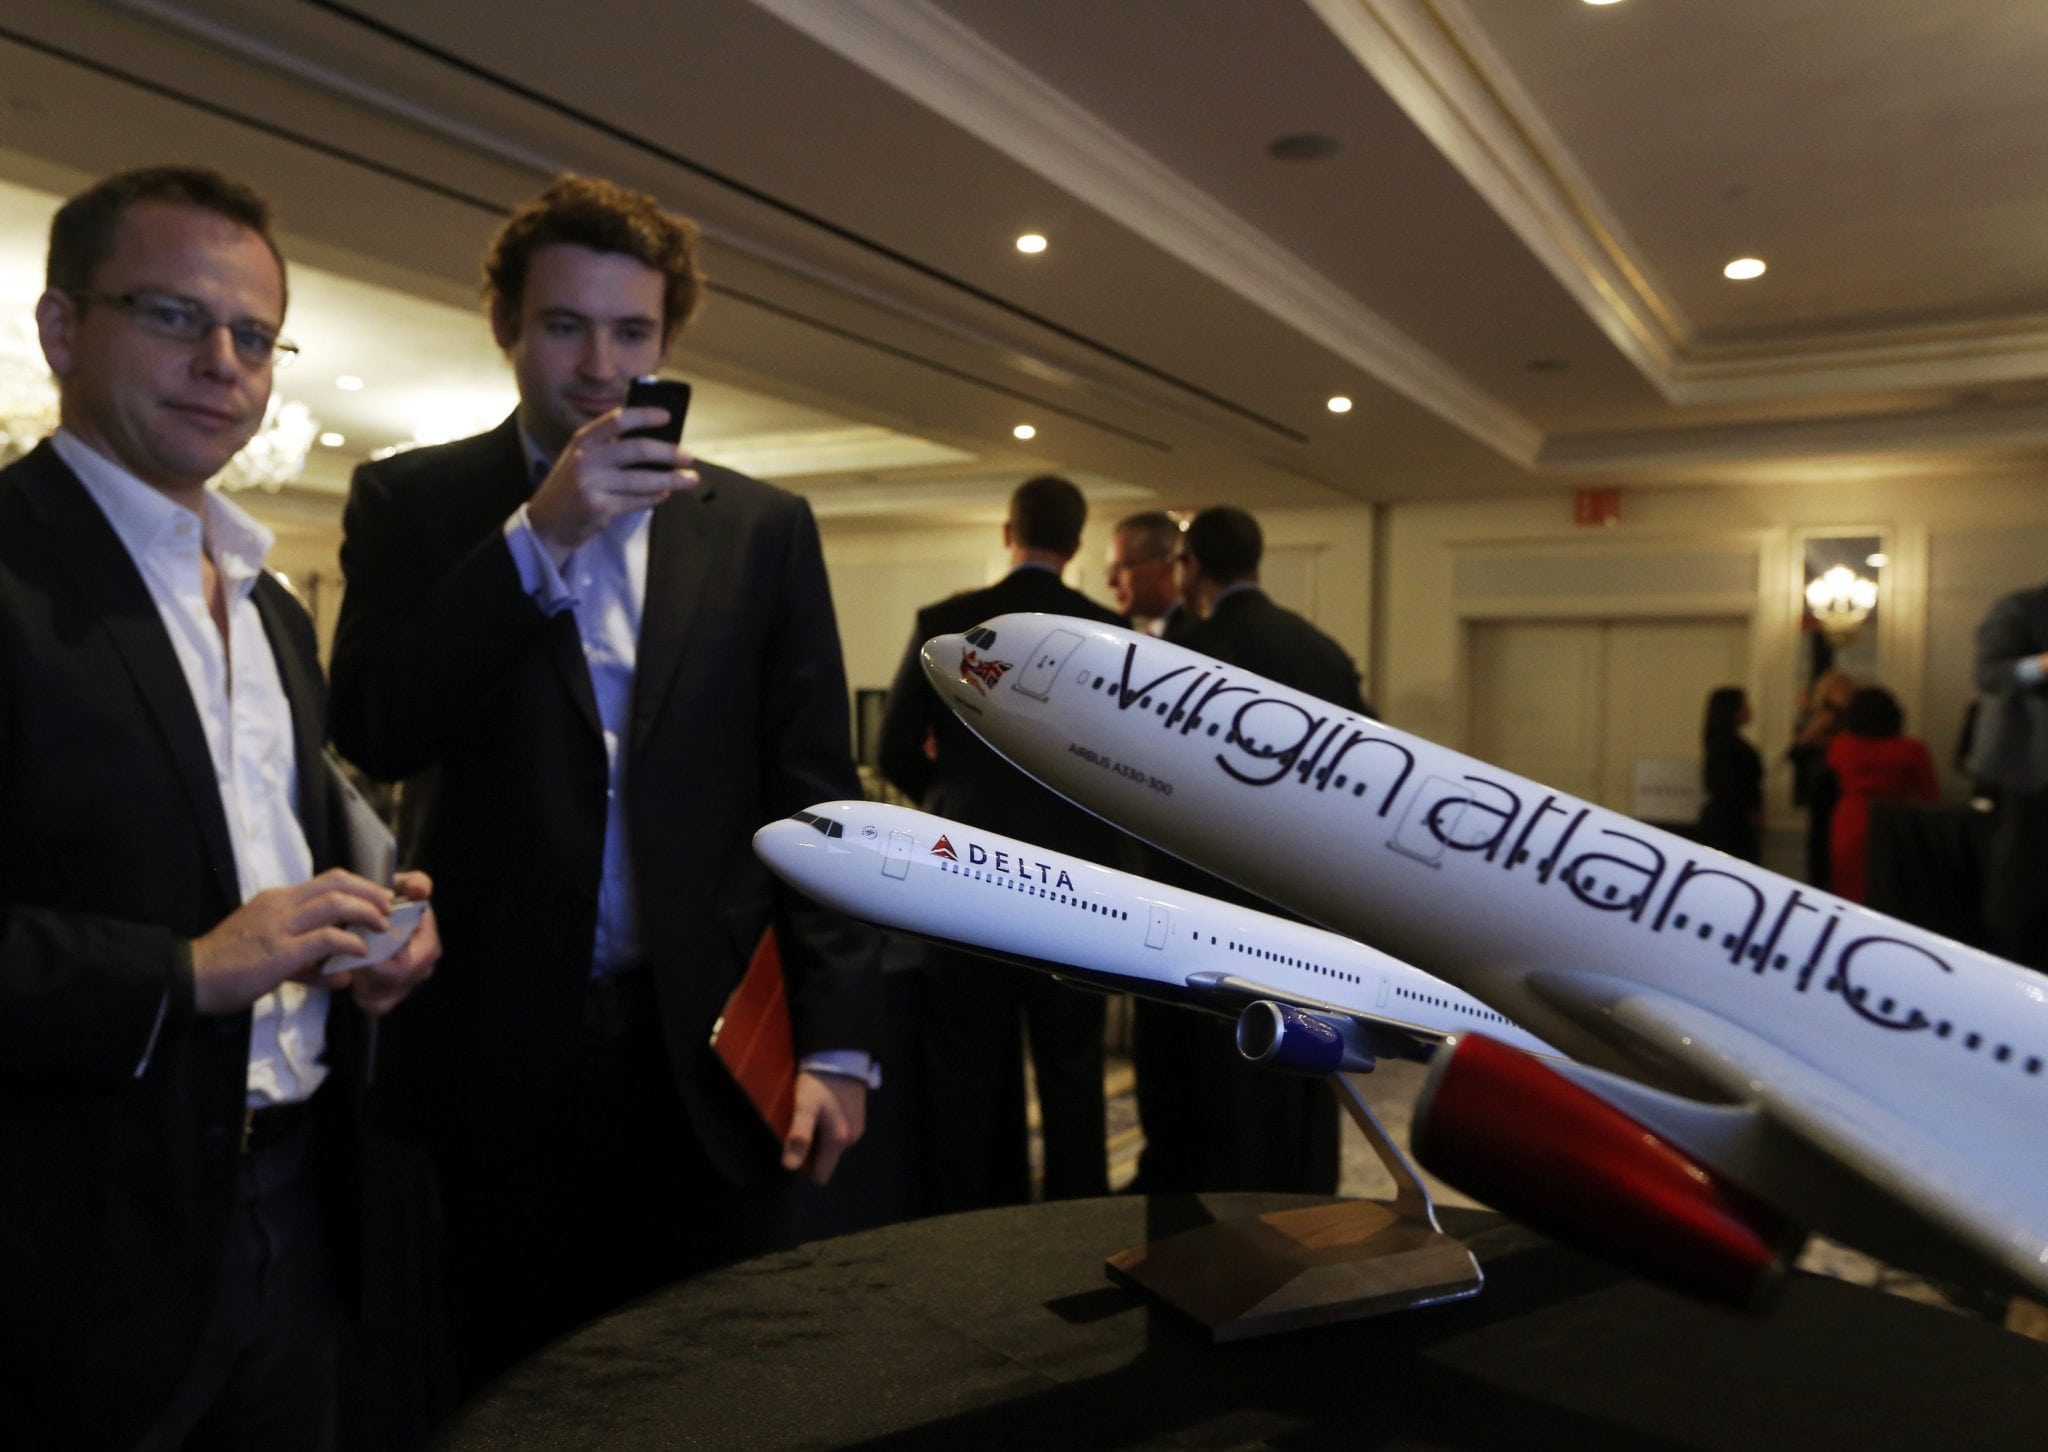 Attendees take pictures following a news conference announcing a sale of Virgin Atlantic airline to Delta Air Lines, in New York. 